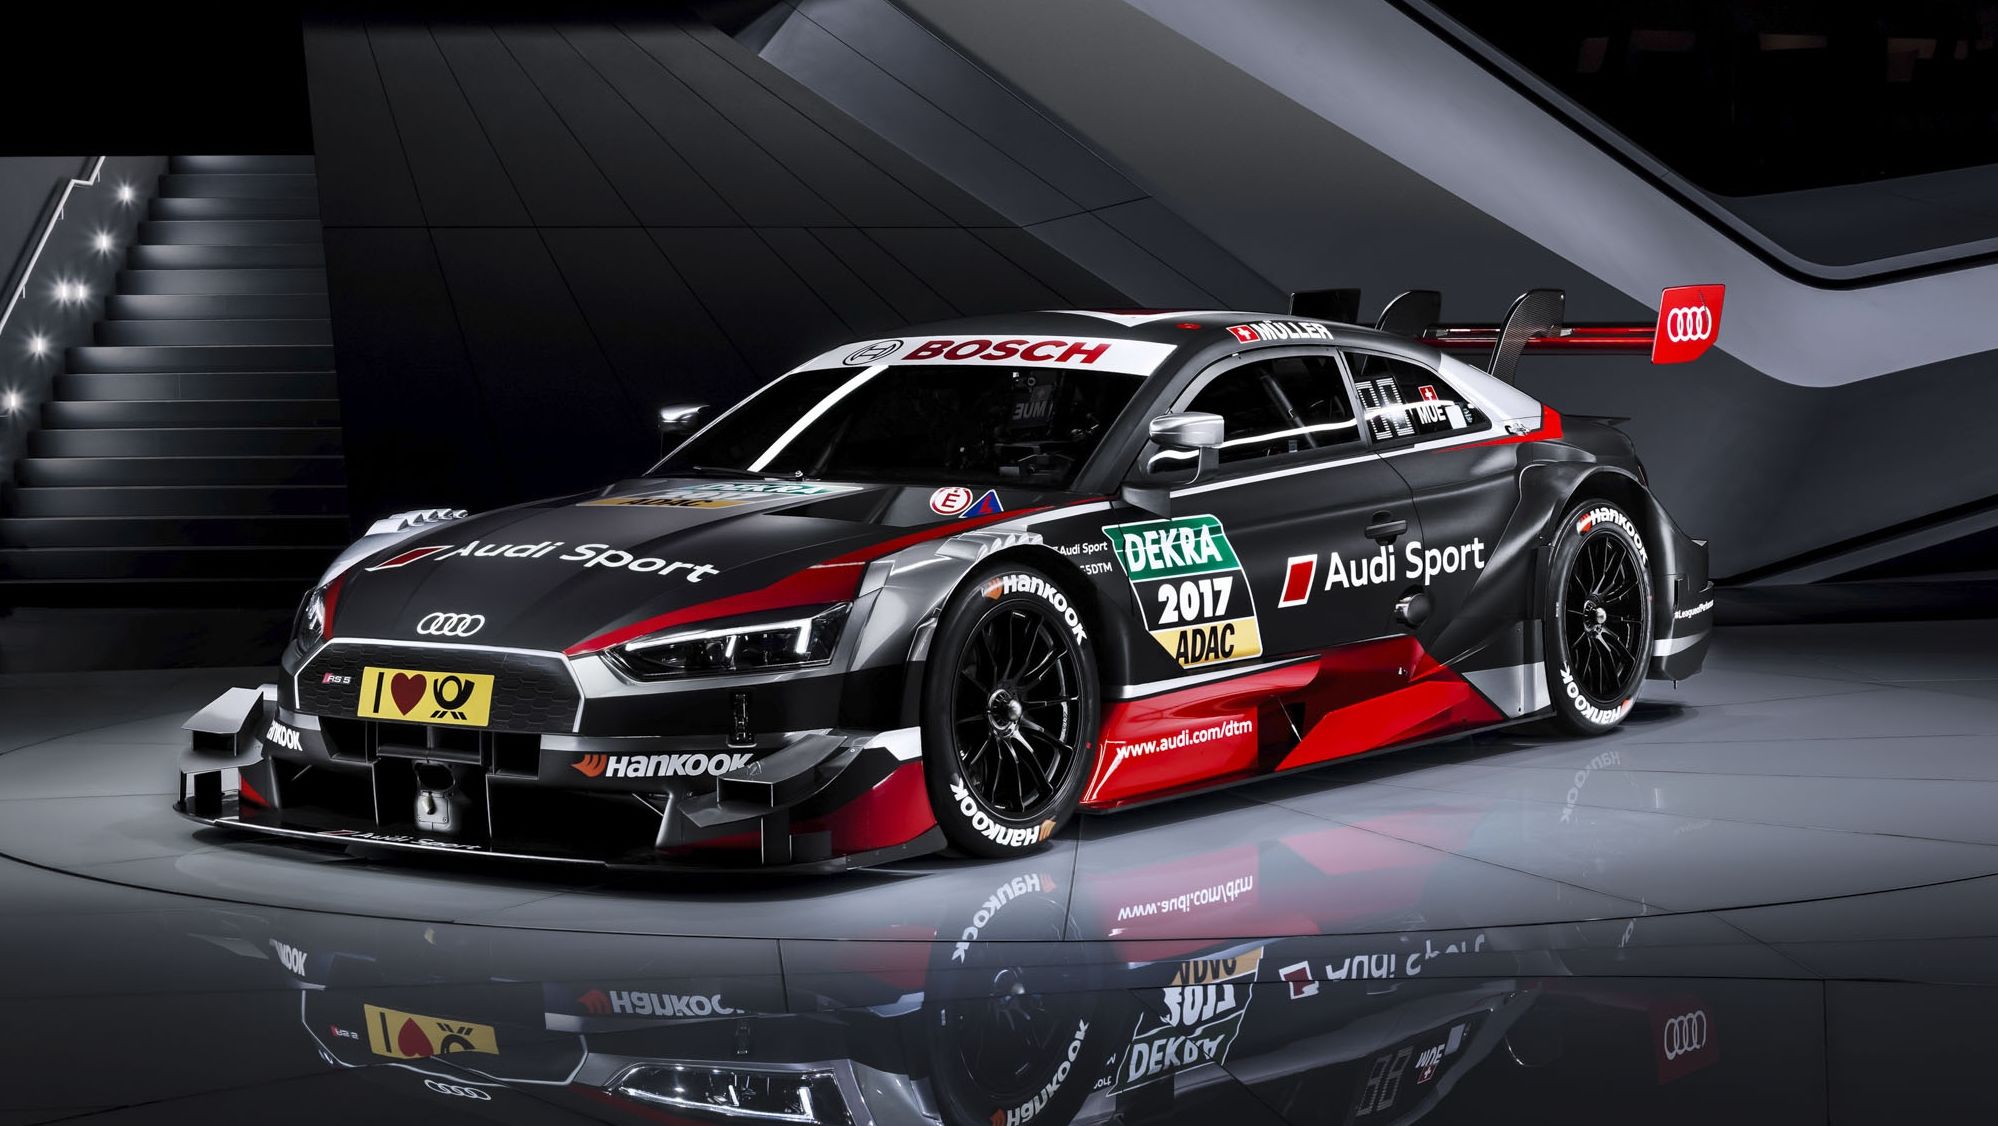 The Audi RS 5 DTM Looks Ready To Take On Any Competition